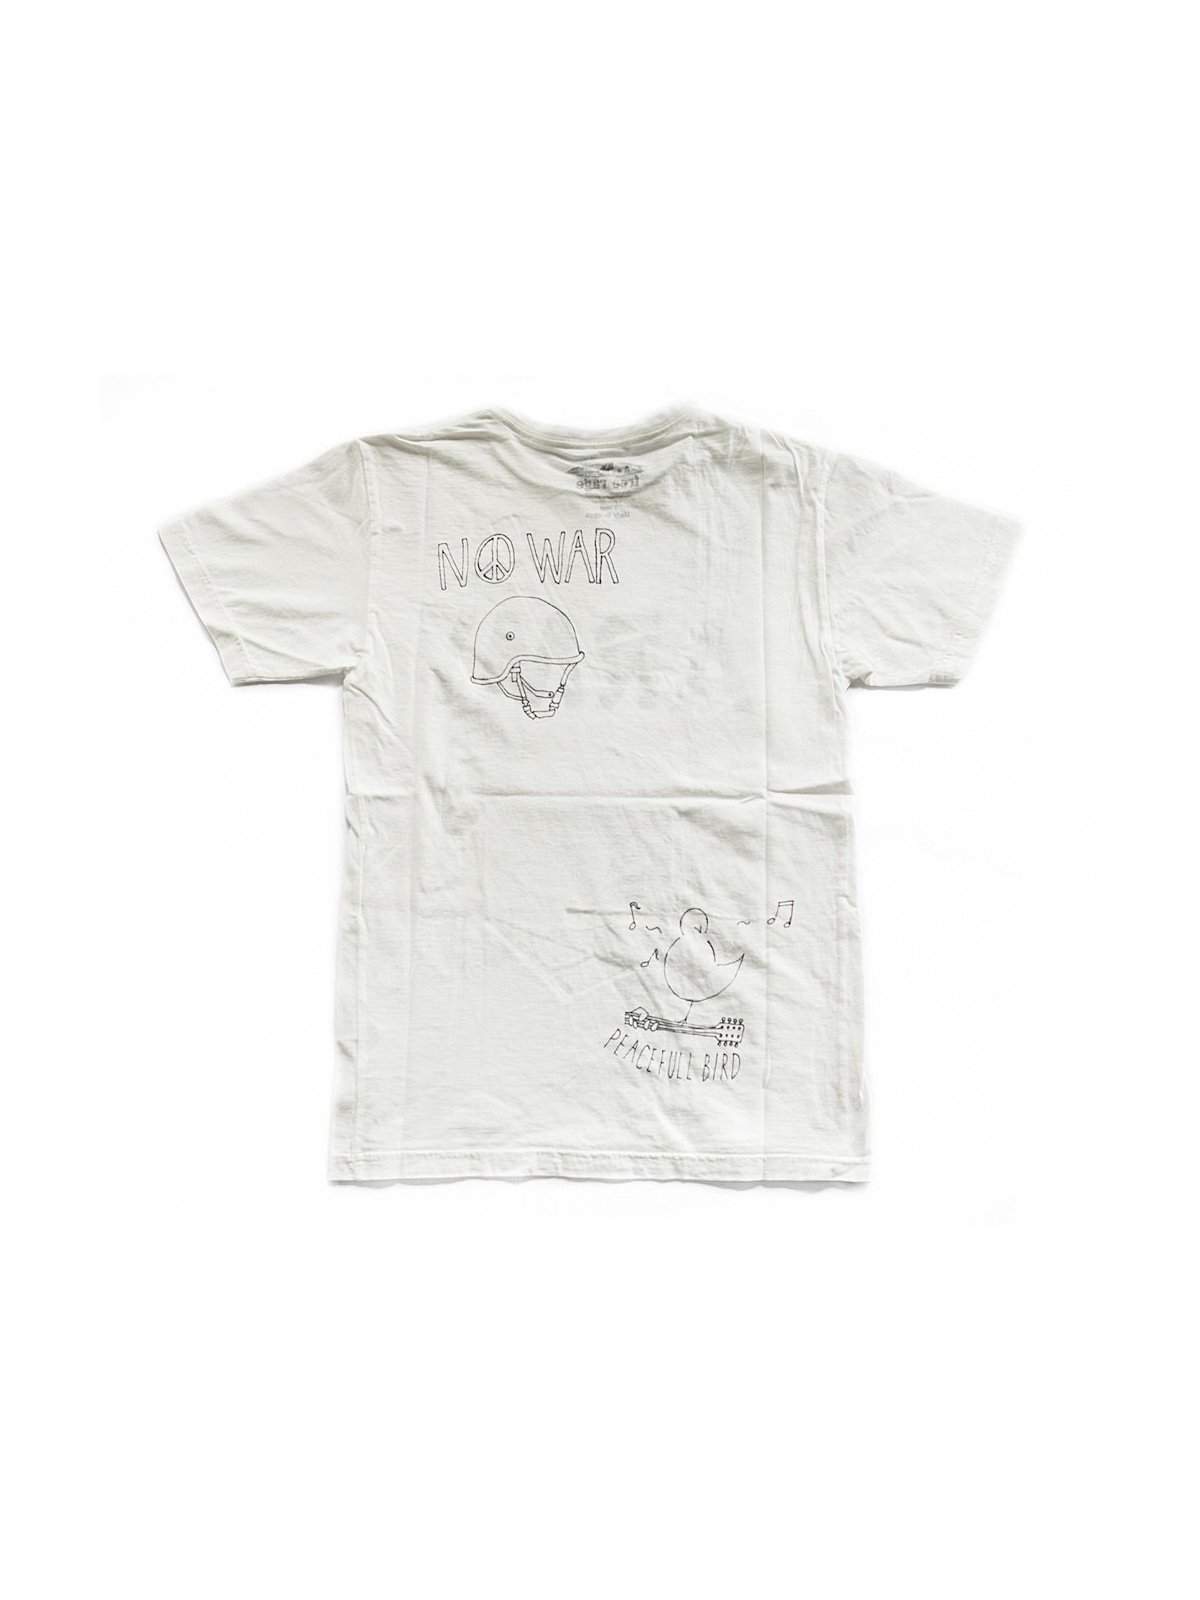 Free Rage Army Hand Paint Tee White - MORE by Morello Indonesia